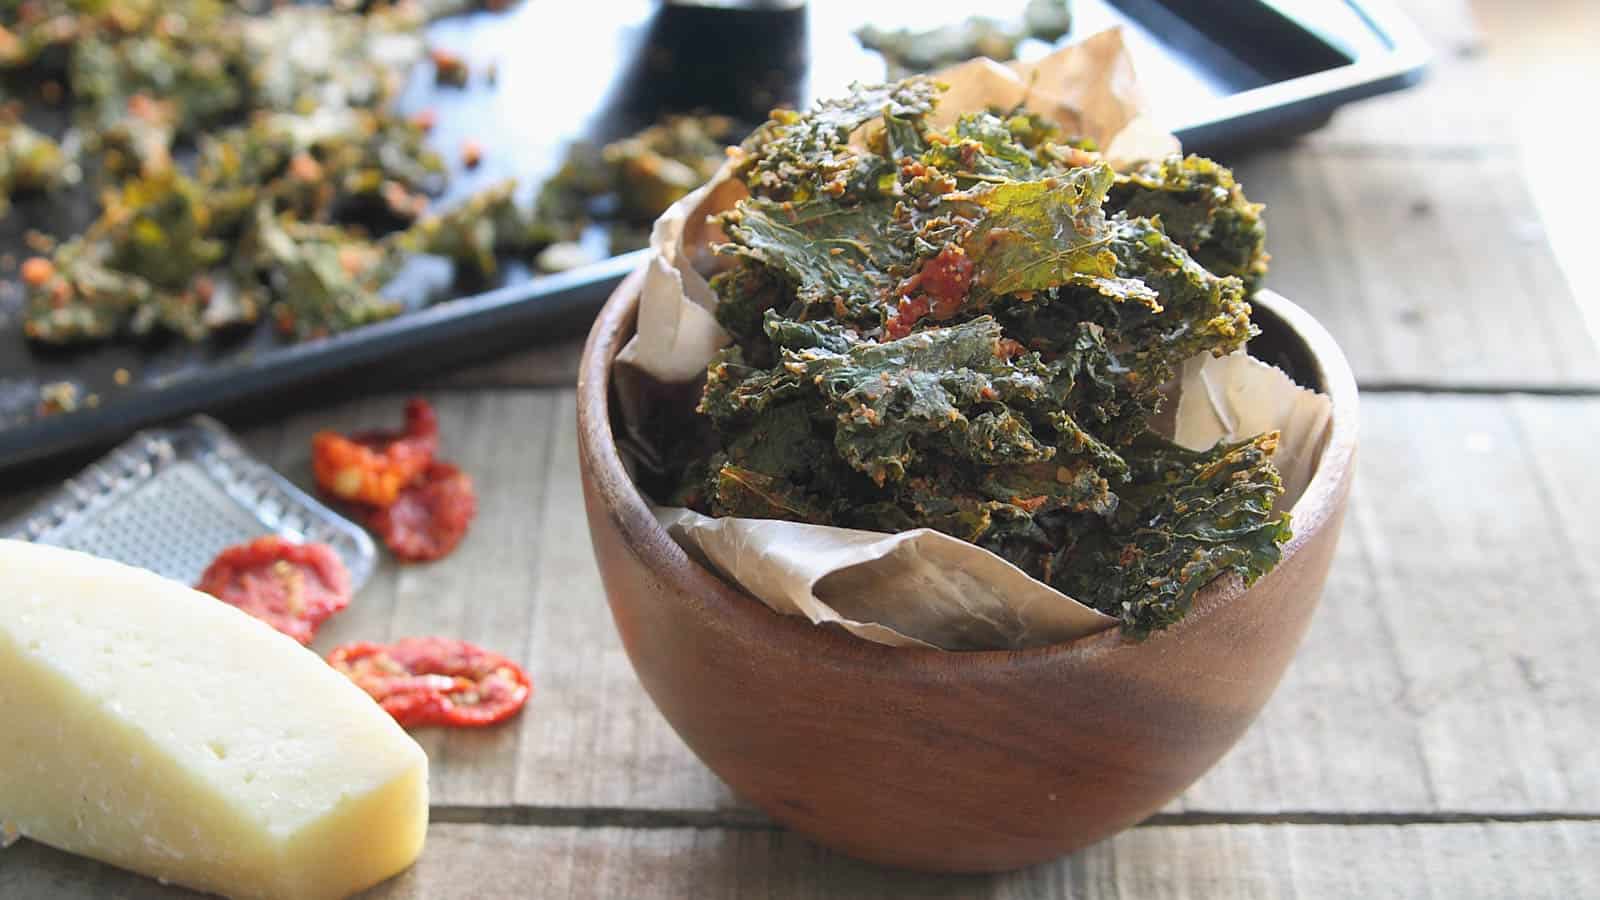 Pizza flavored kale chips in a wooden bowl.